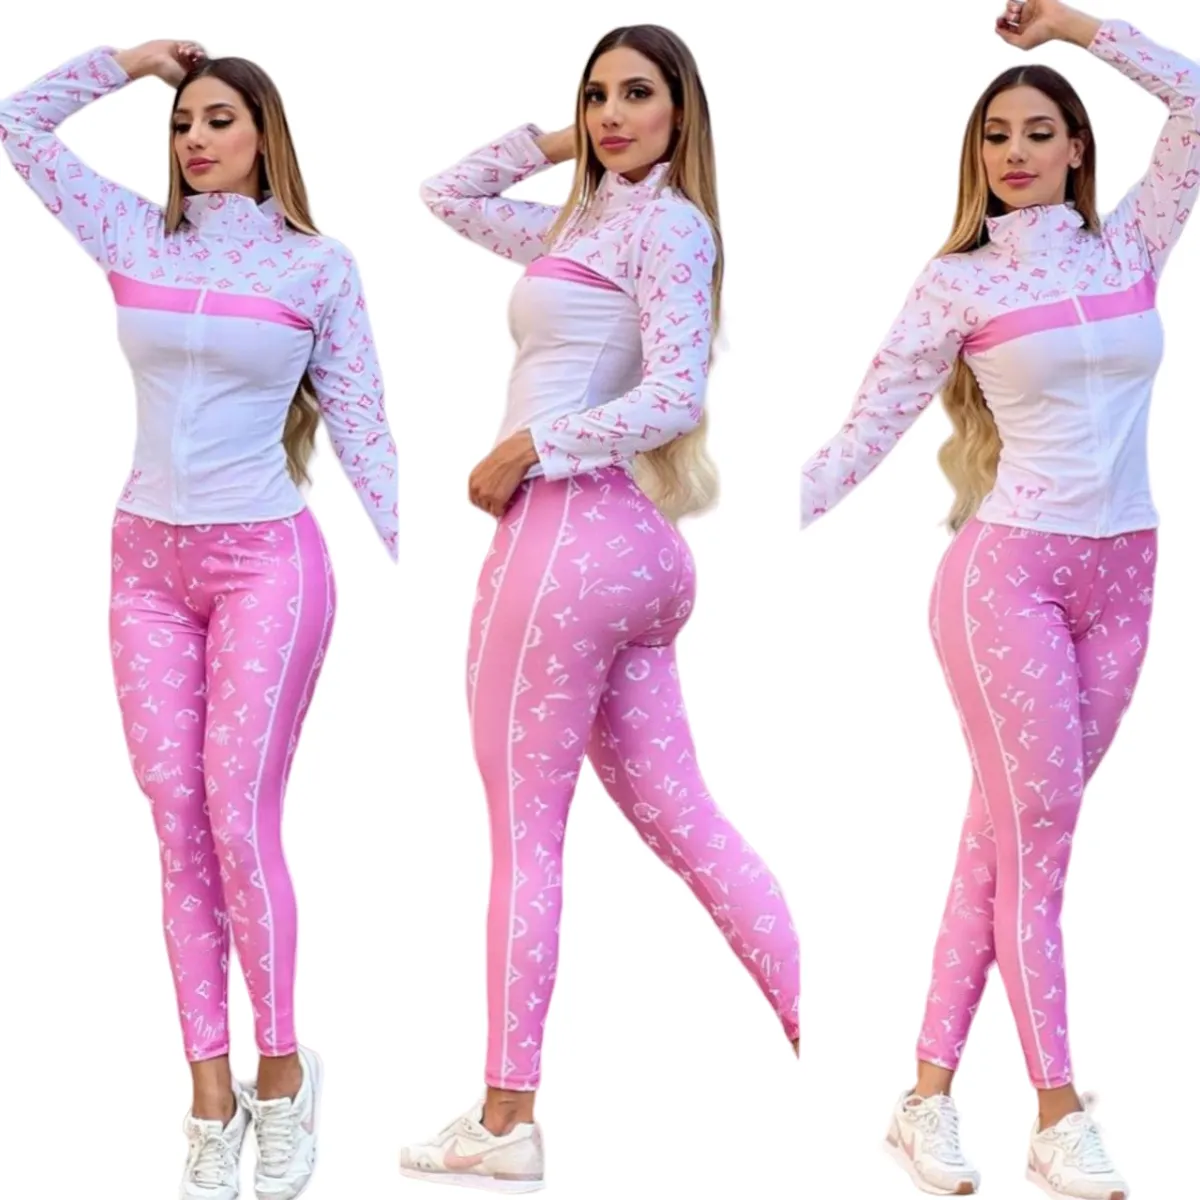 Jacket and Bottoms Two Piece Pants Outfit Women Fashion Zipper Sweatshirt and Pant Sets Free Ship